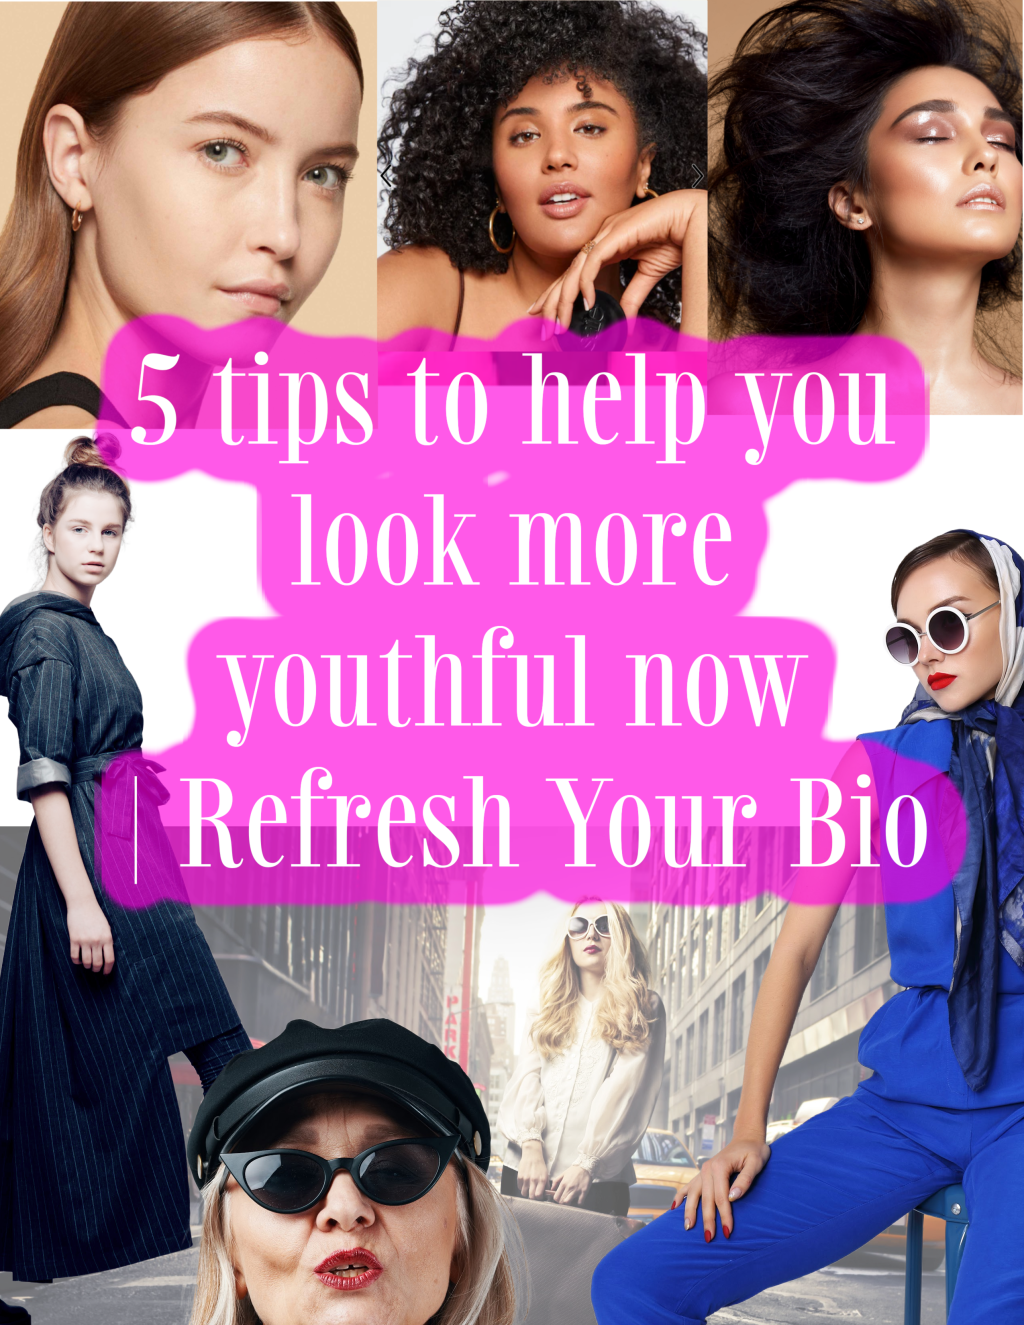 5 tips to help you look more youthful now | Refresh Your Bio